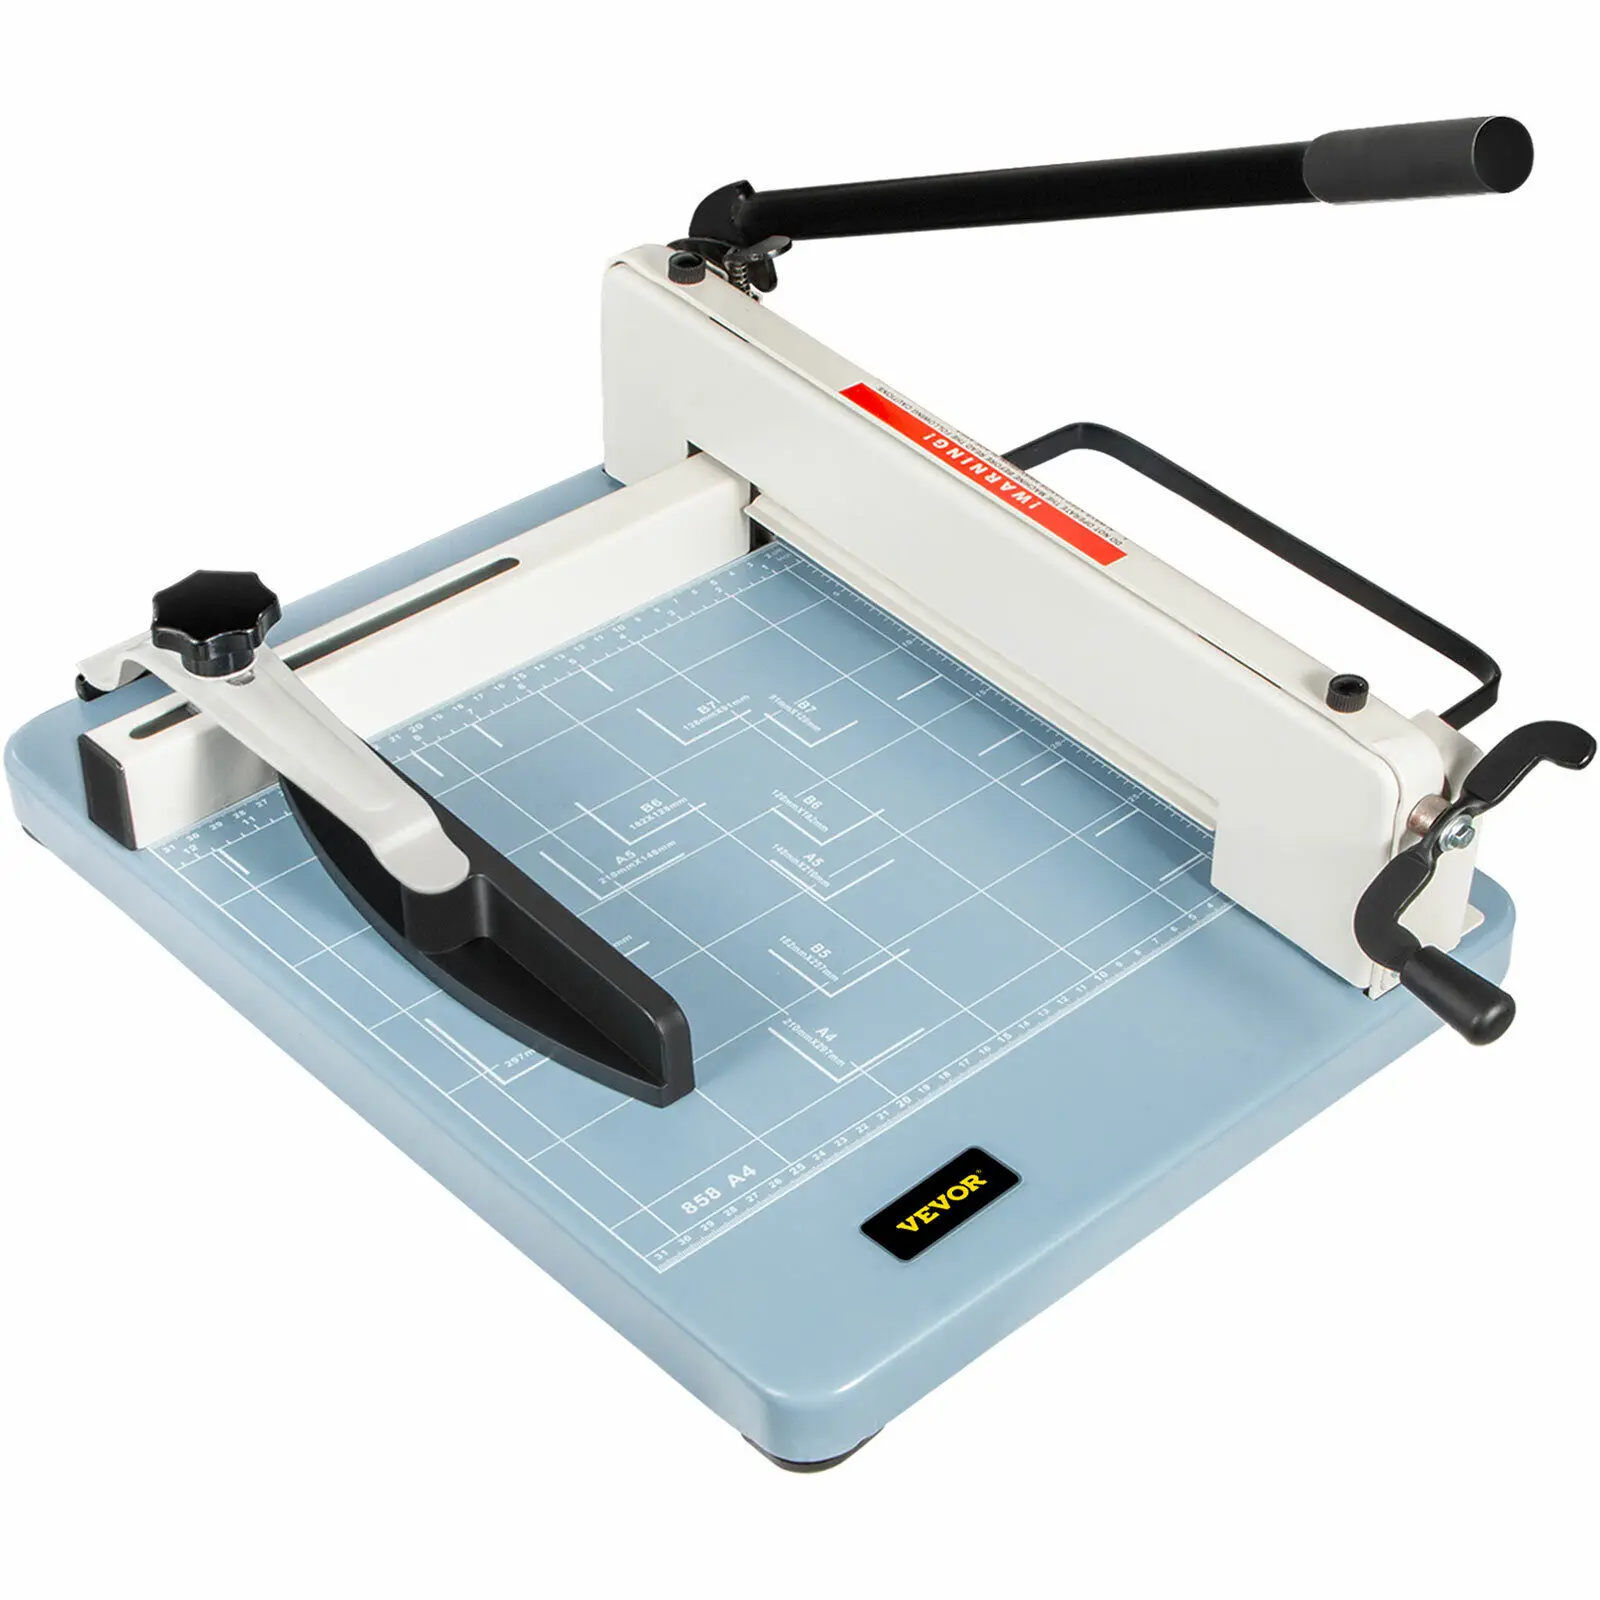 

VEVOR Industrial Paper Cutter Heavy Duty Paper Cutter 17” A4Paper Cutting for Offices, Schools, Businesses and Printing Shops A4